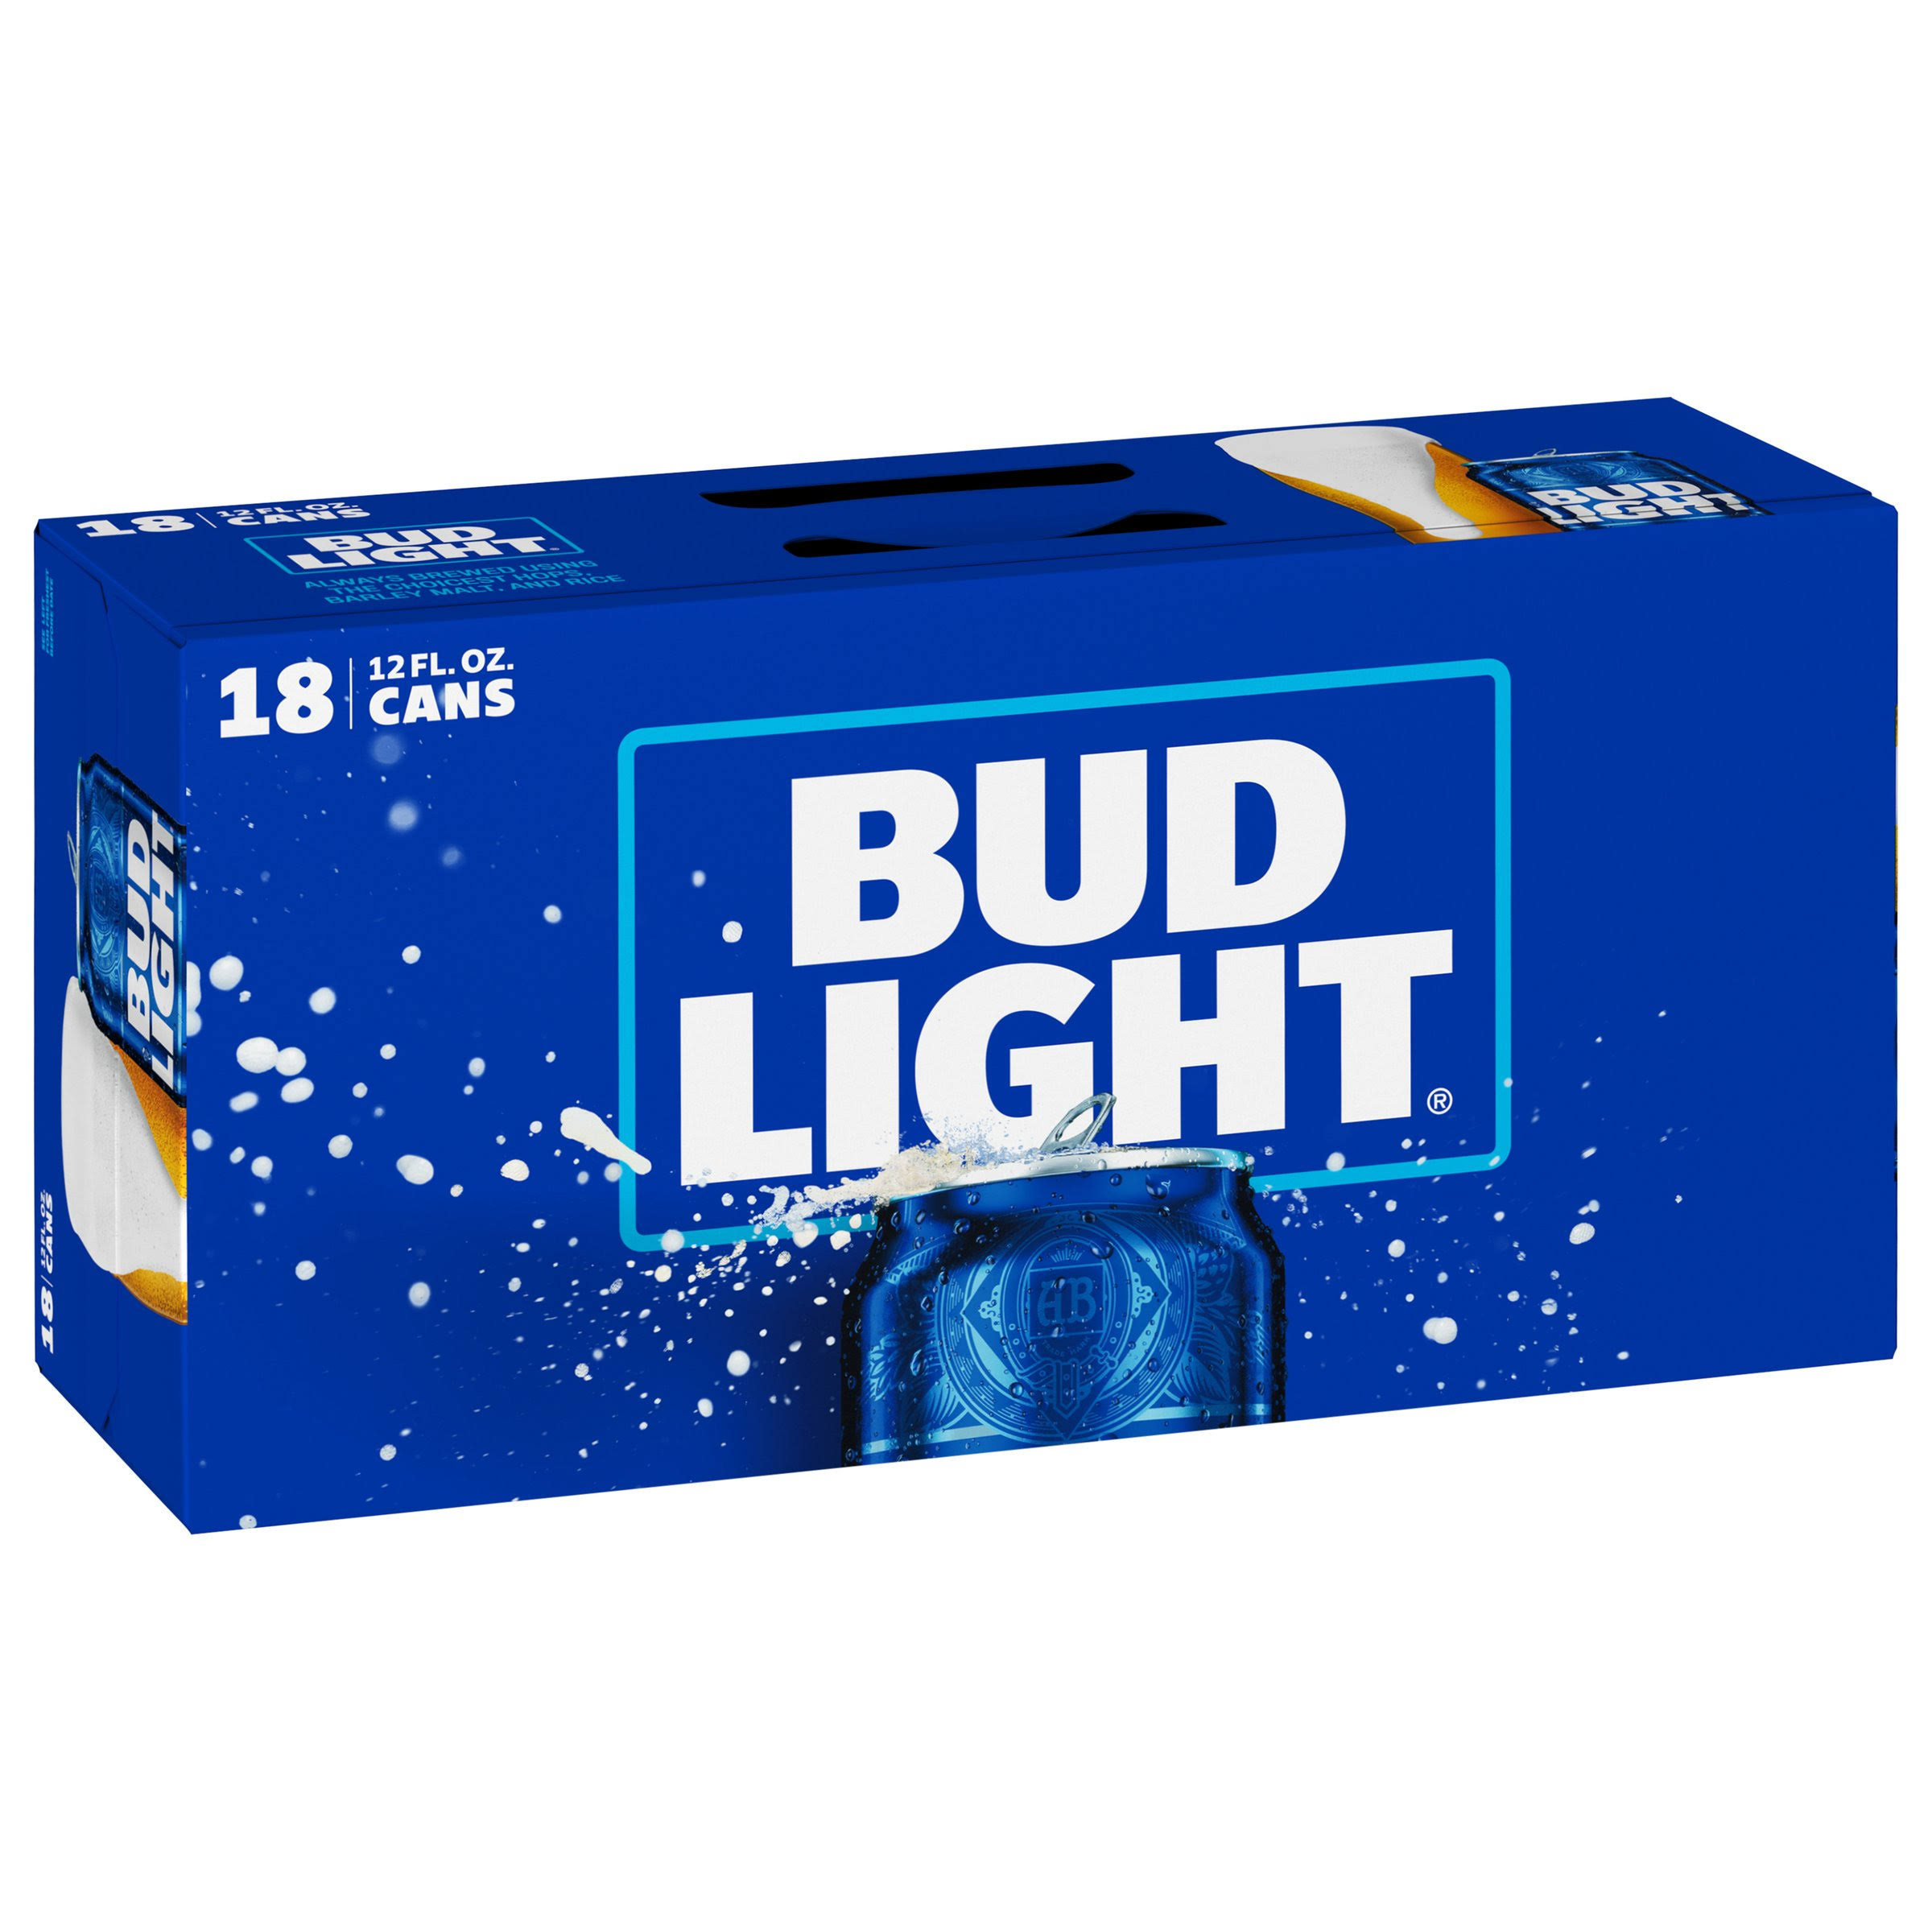 Bud Light Beer - 18 Cans